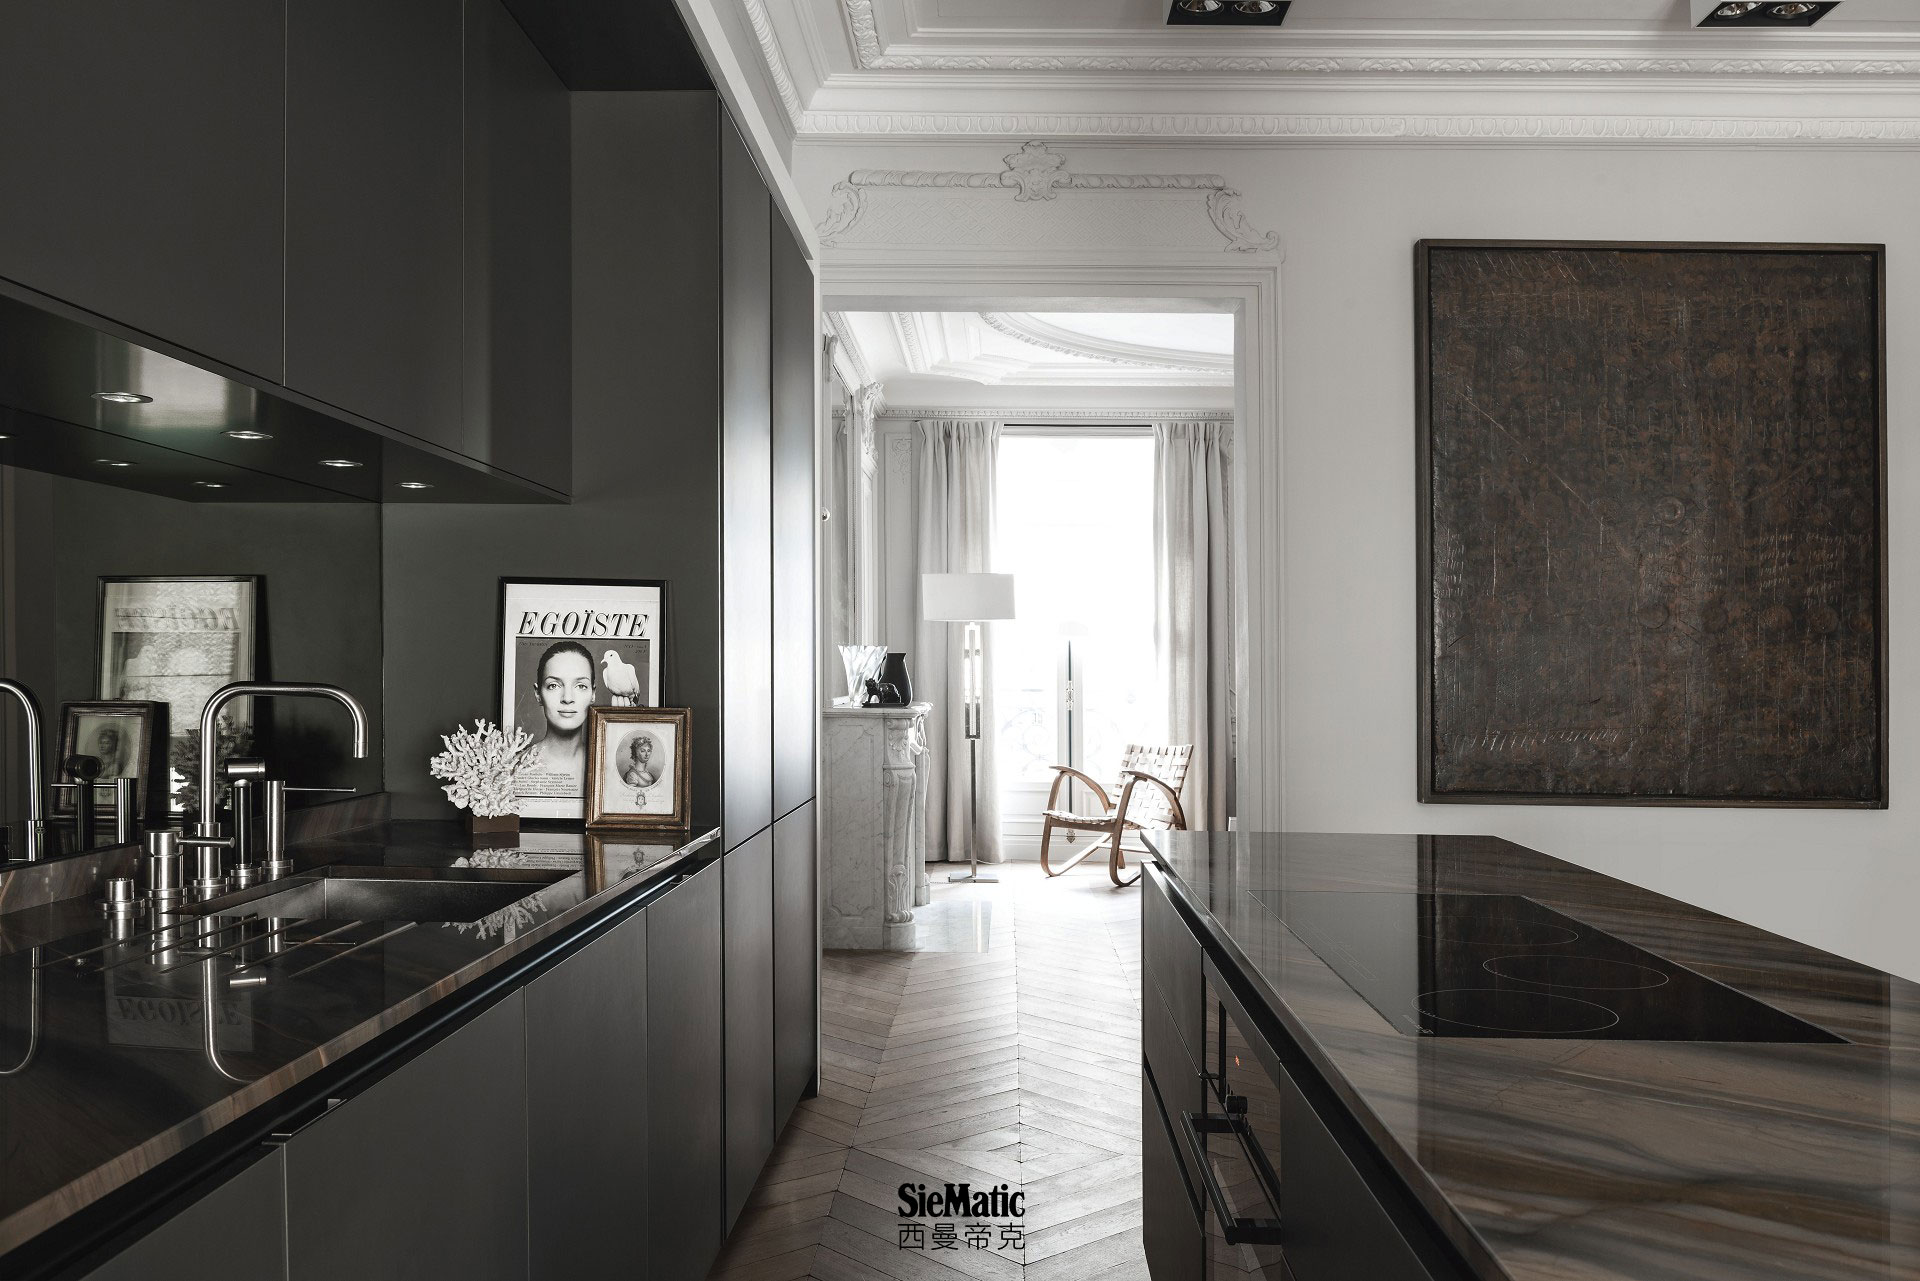 SieMatic kitchen design with SQ lacquer finishes in matte black and dark countertops